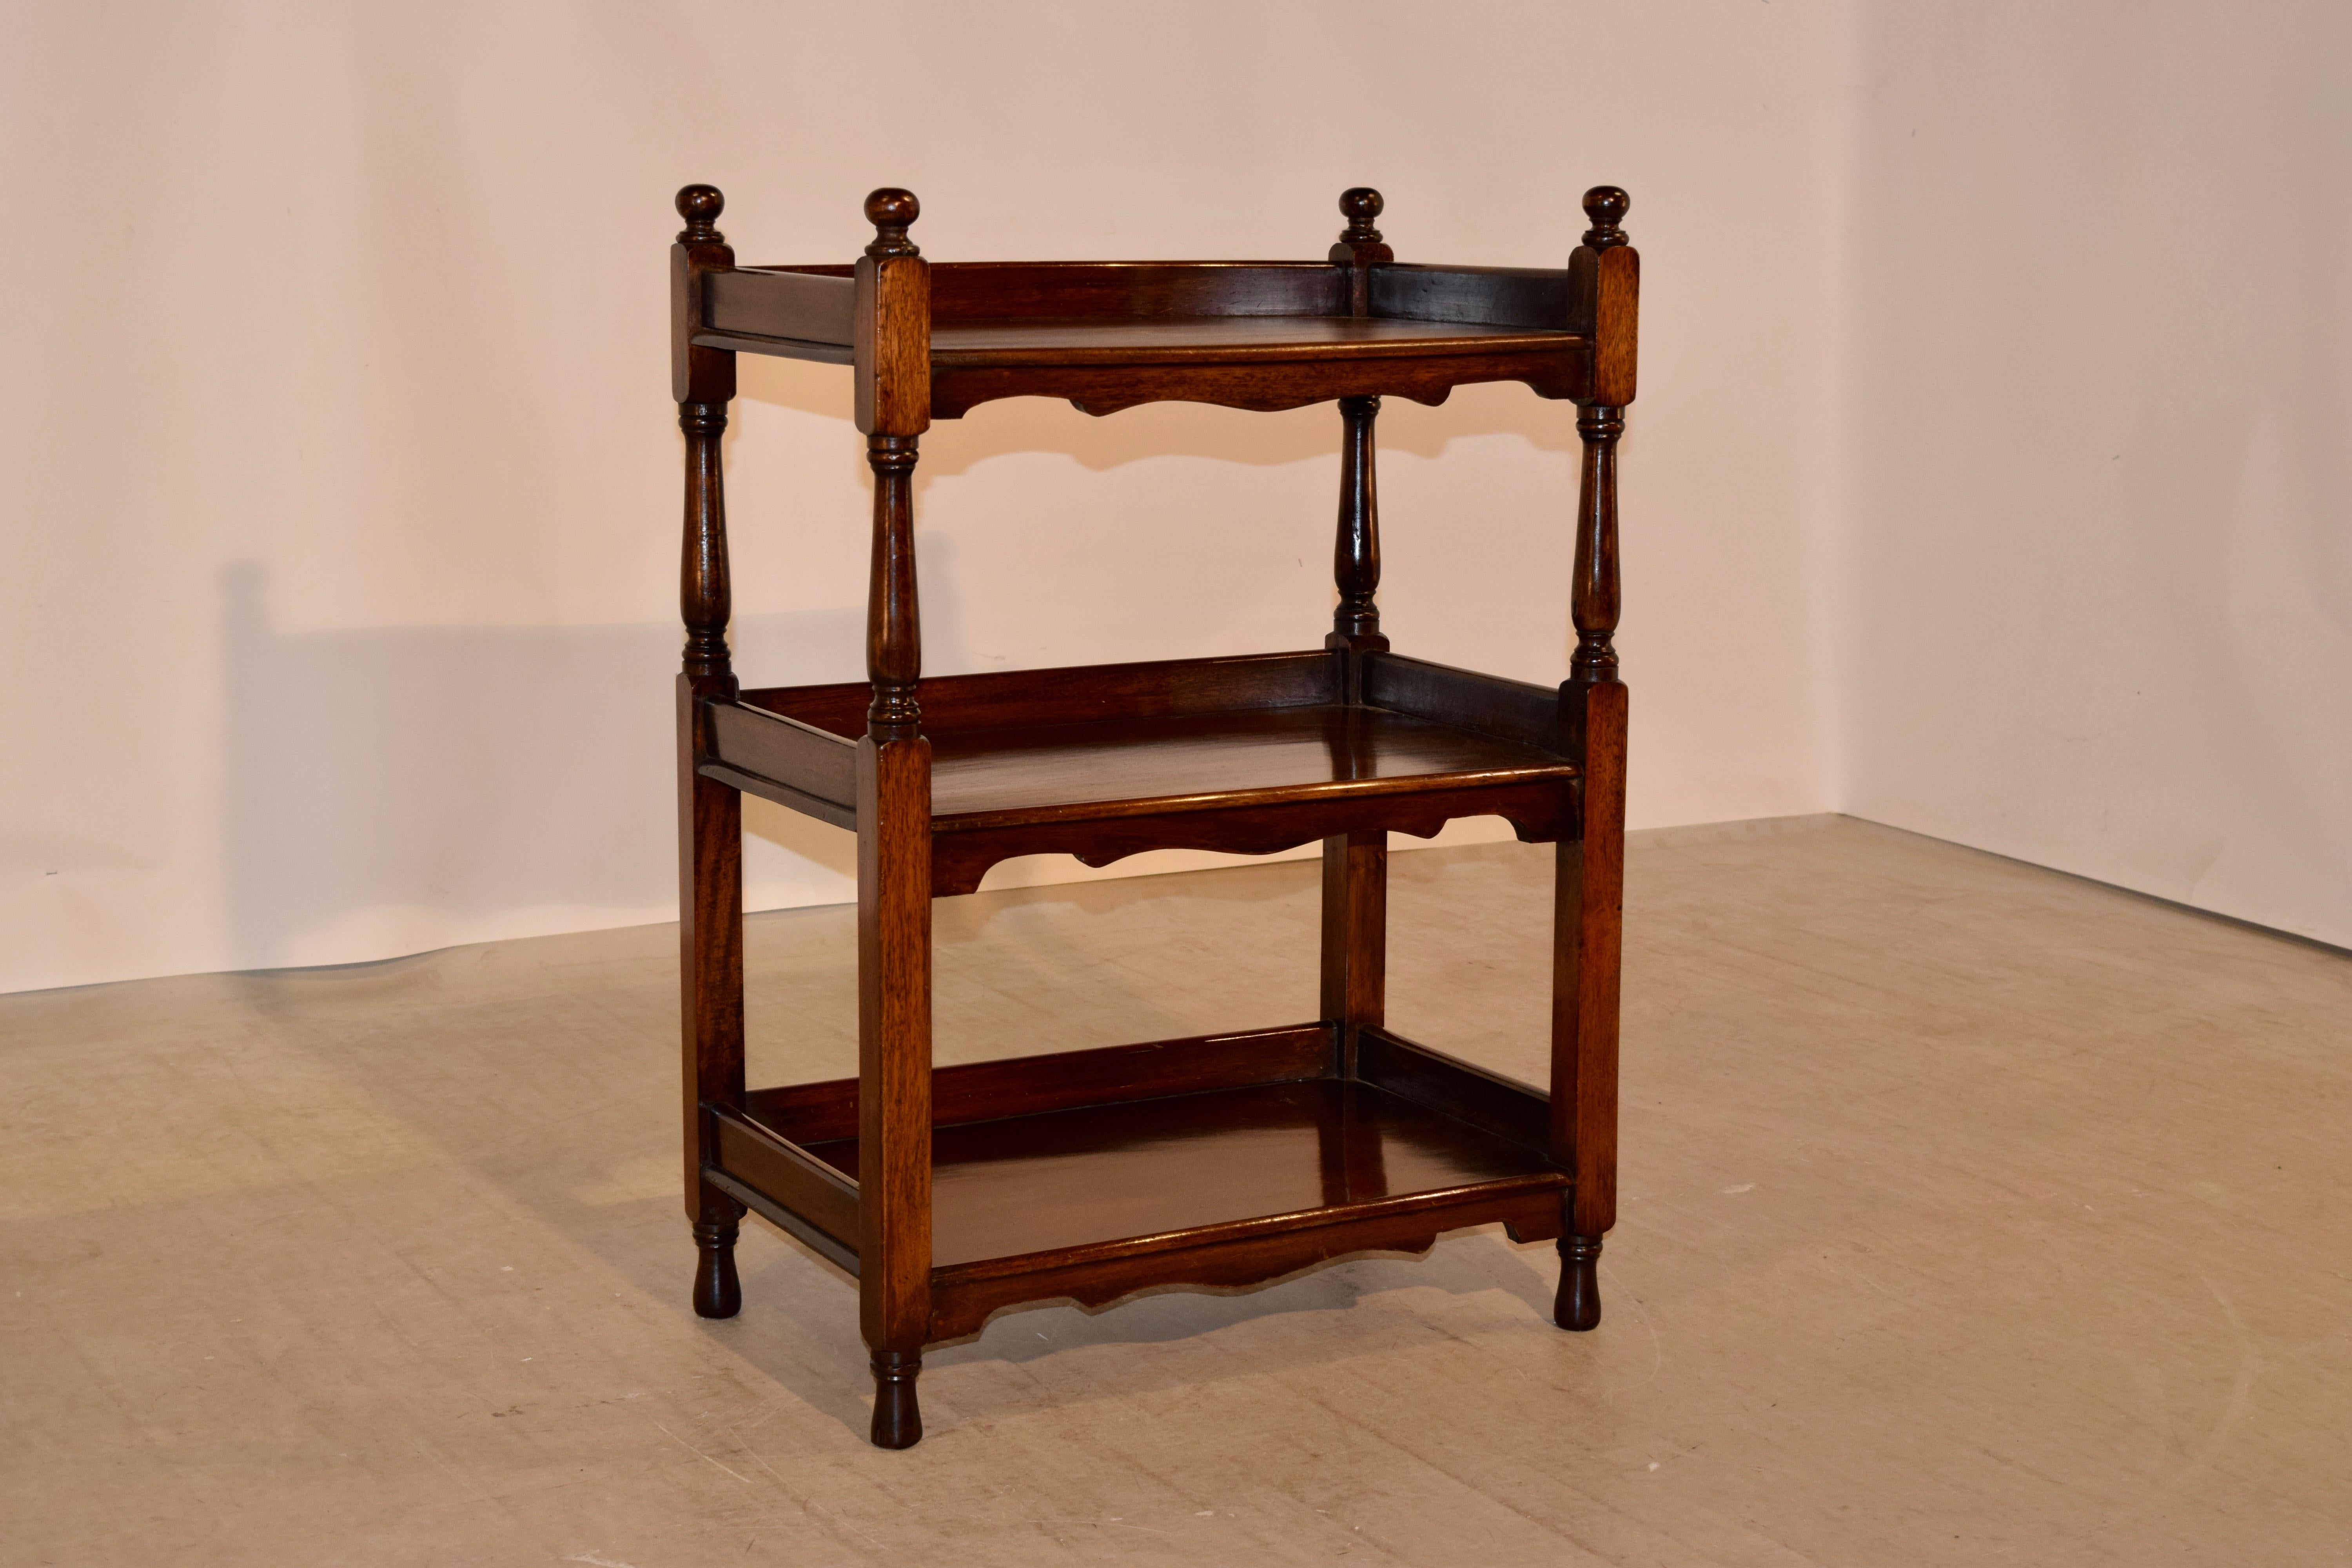 19th century English mahogany shelf with three shelves. The top is decorated with hand-turned finials and follows down to three shelves, all with galleries and hand scalloped aprons on the front of the shelves. Supported on hand-turned feet.